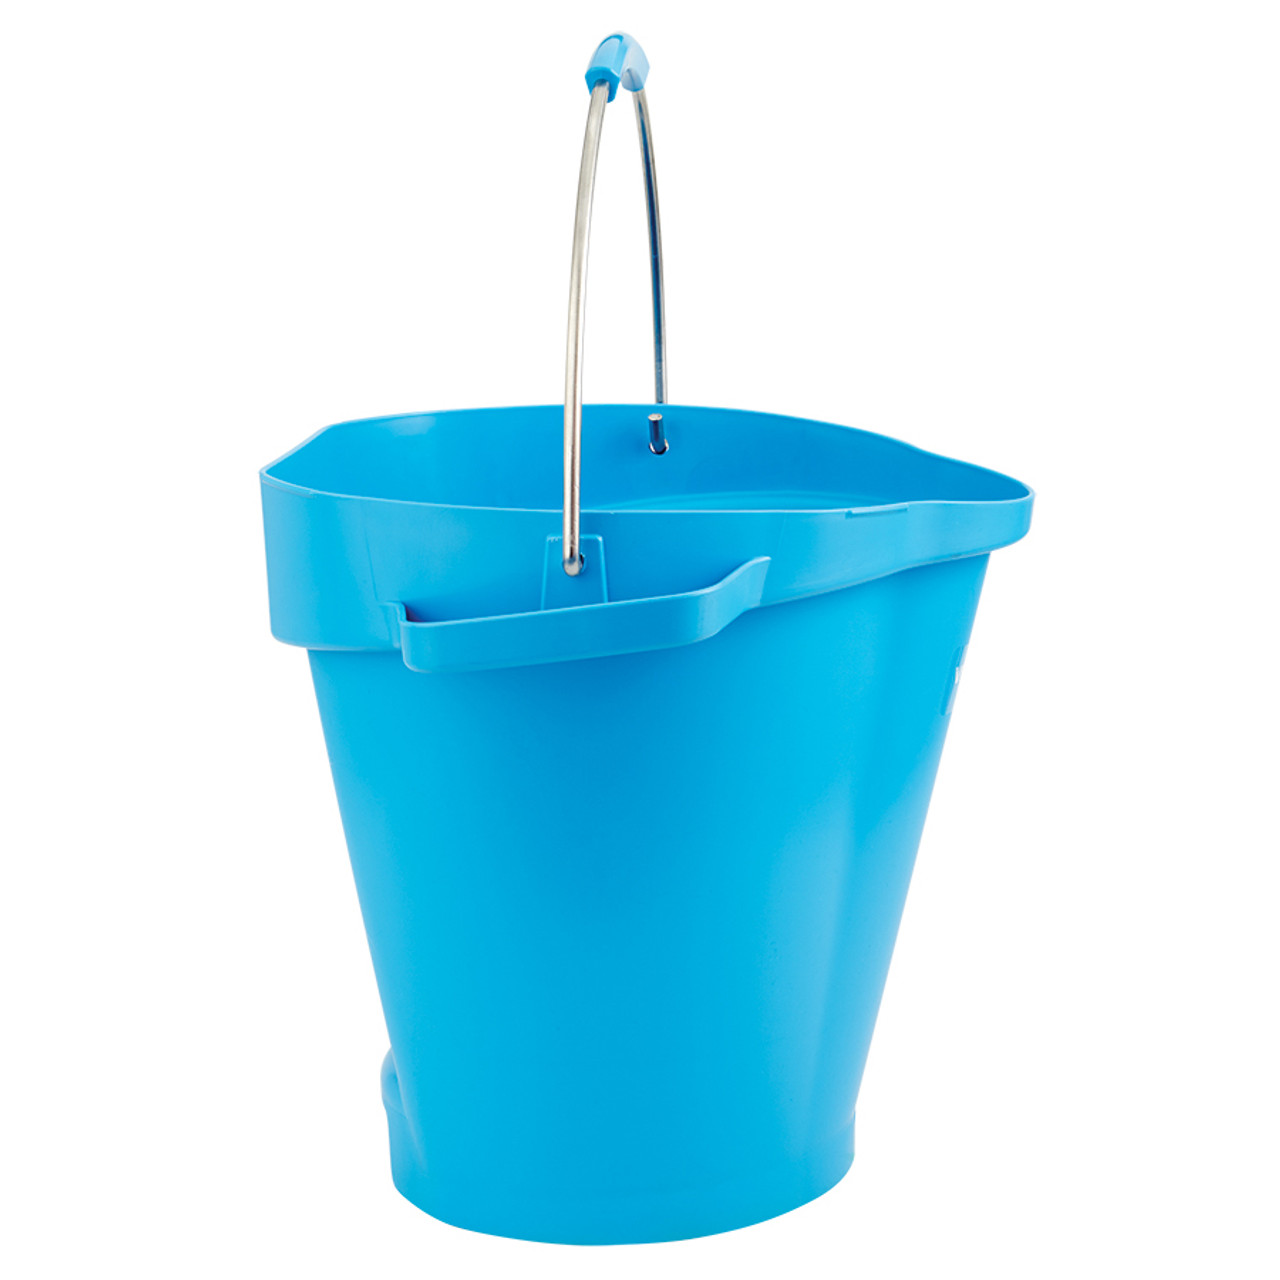 Difference Between Bucket and Pail